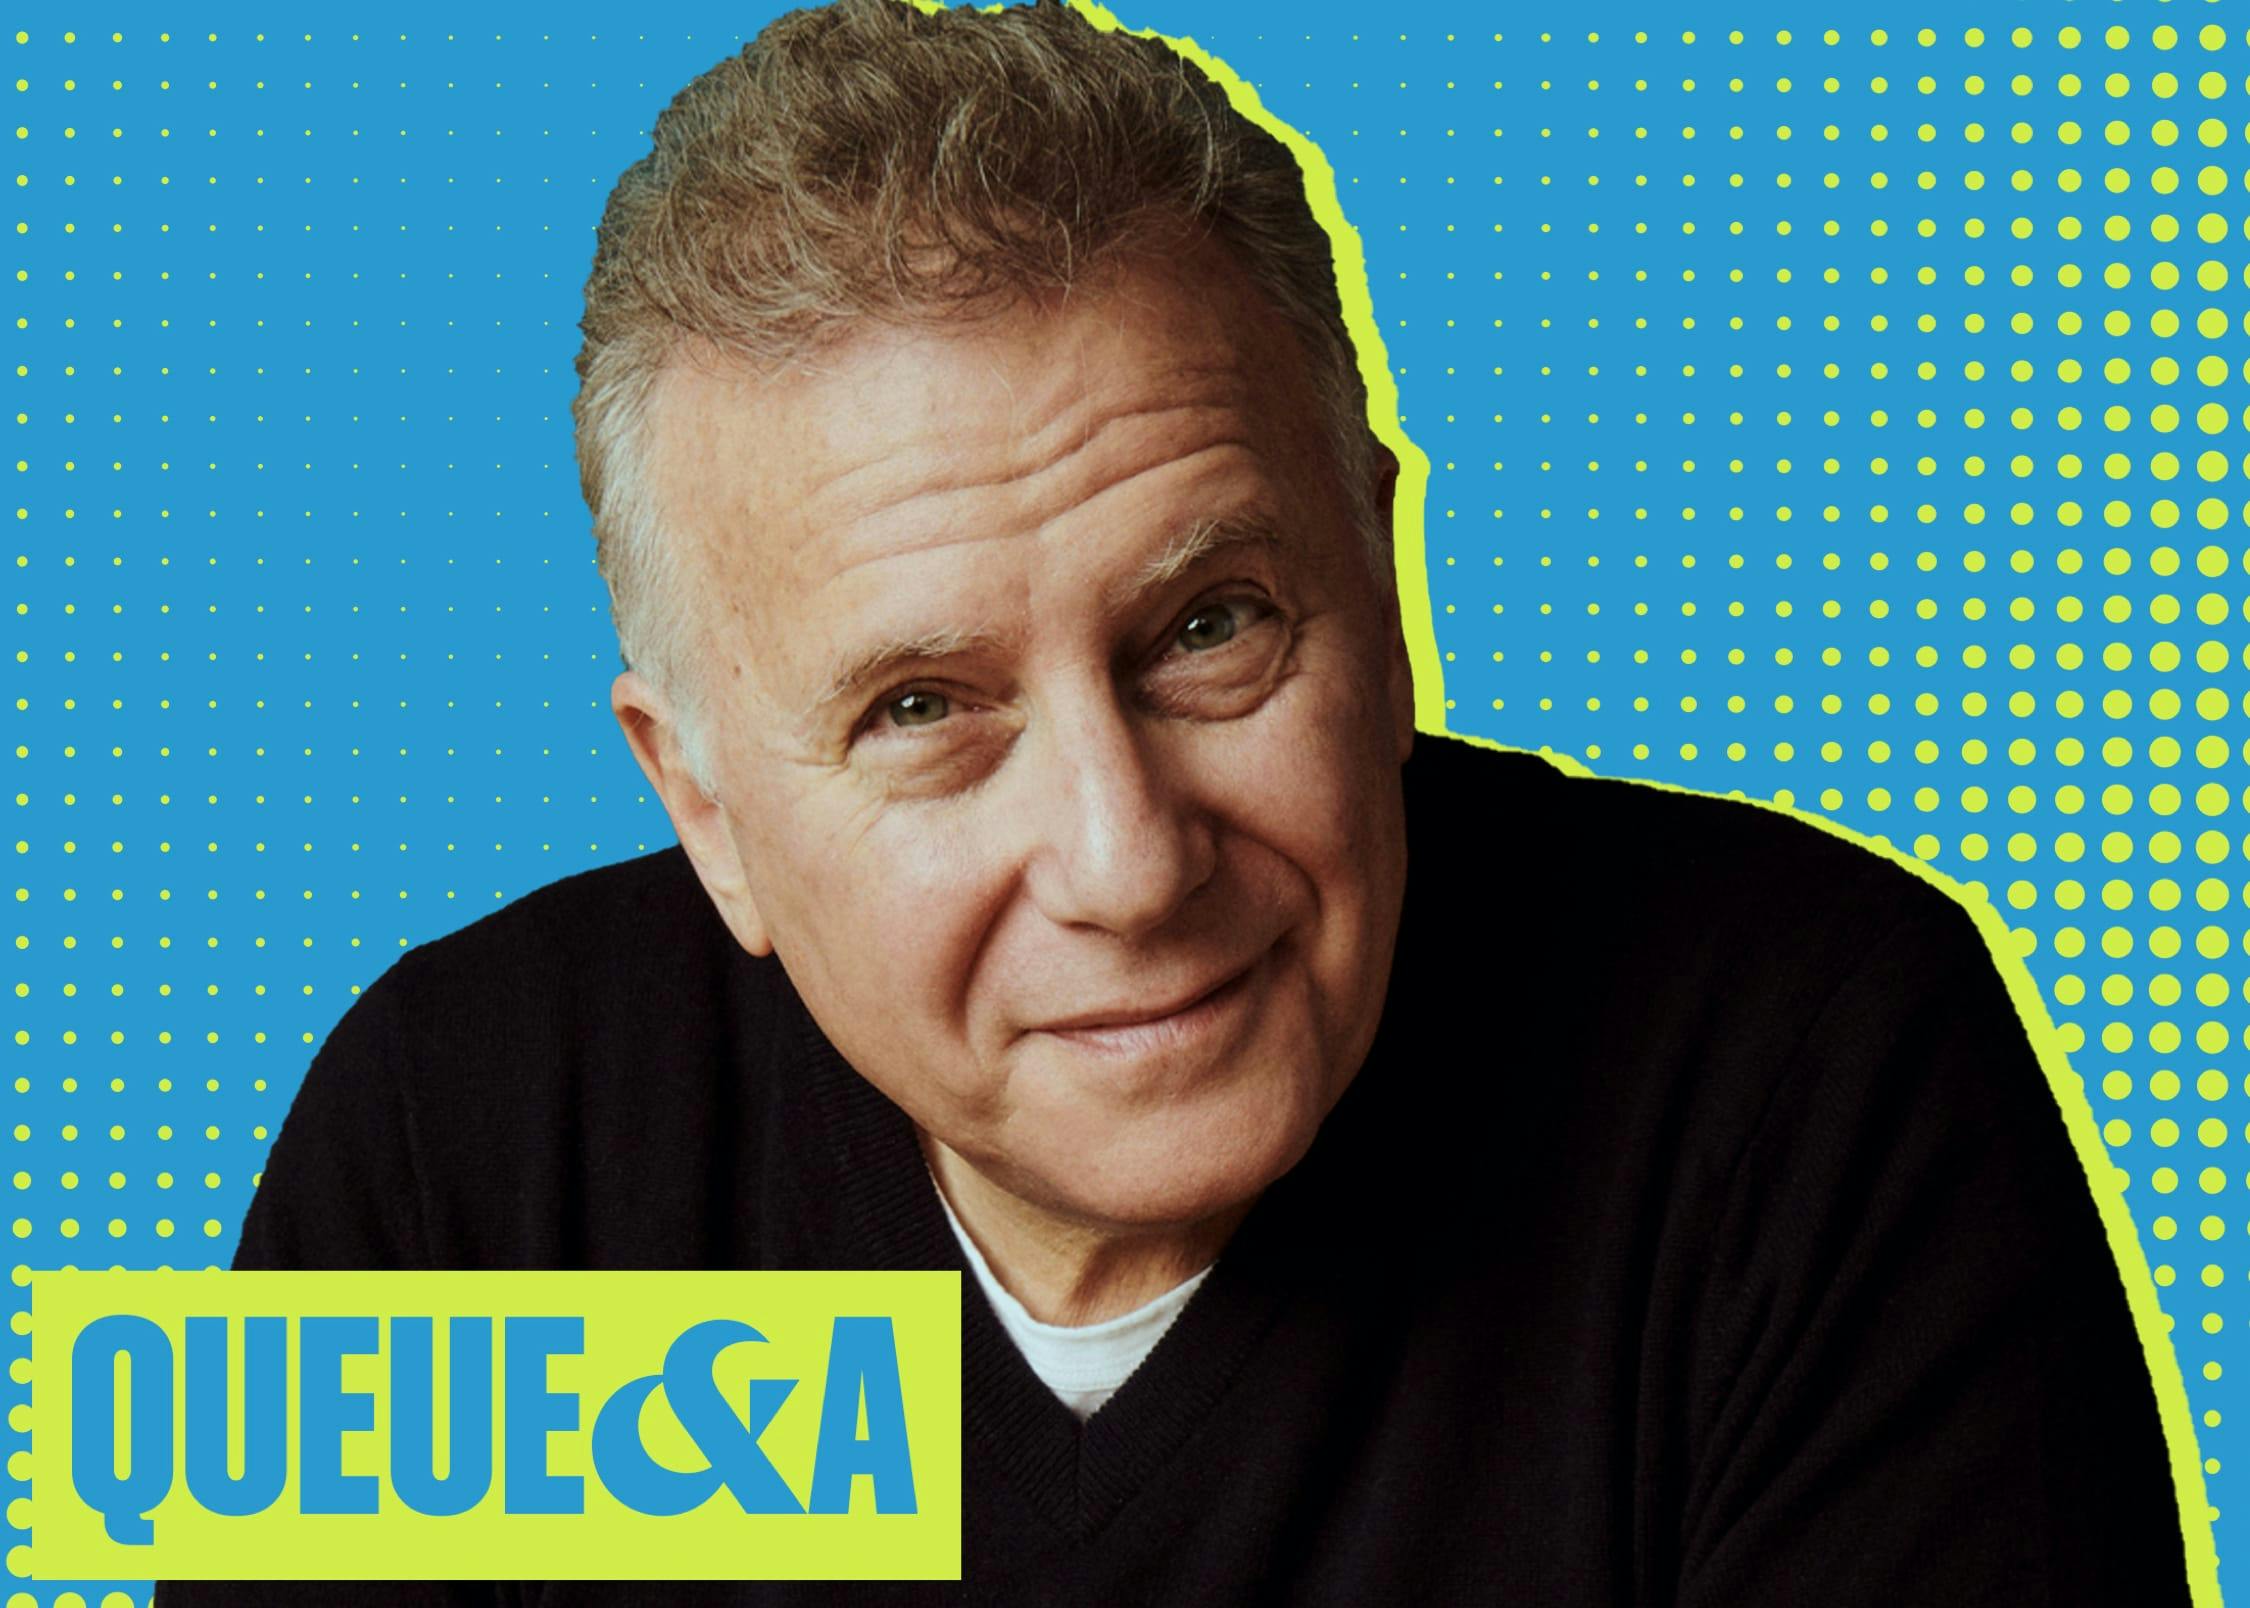 Paul Reiser wears a black sweater. The background is blue and yellow, and it reads Queue & A in the bottom left hand corner.